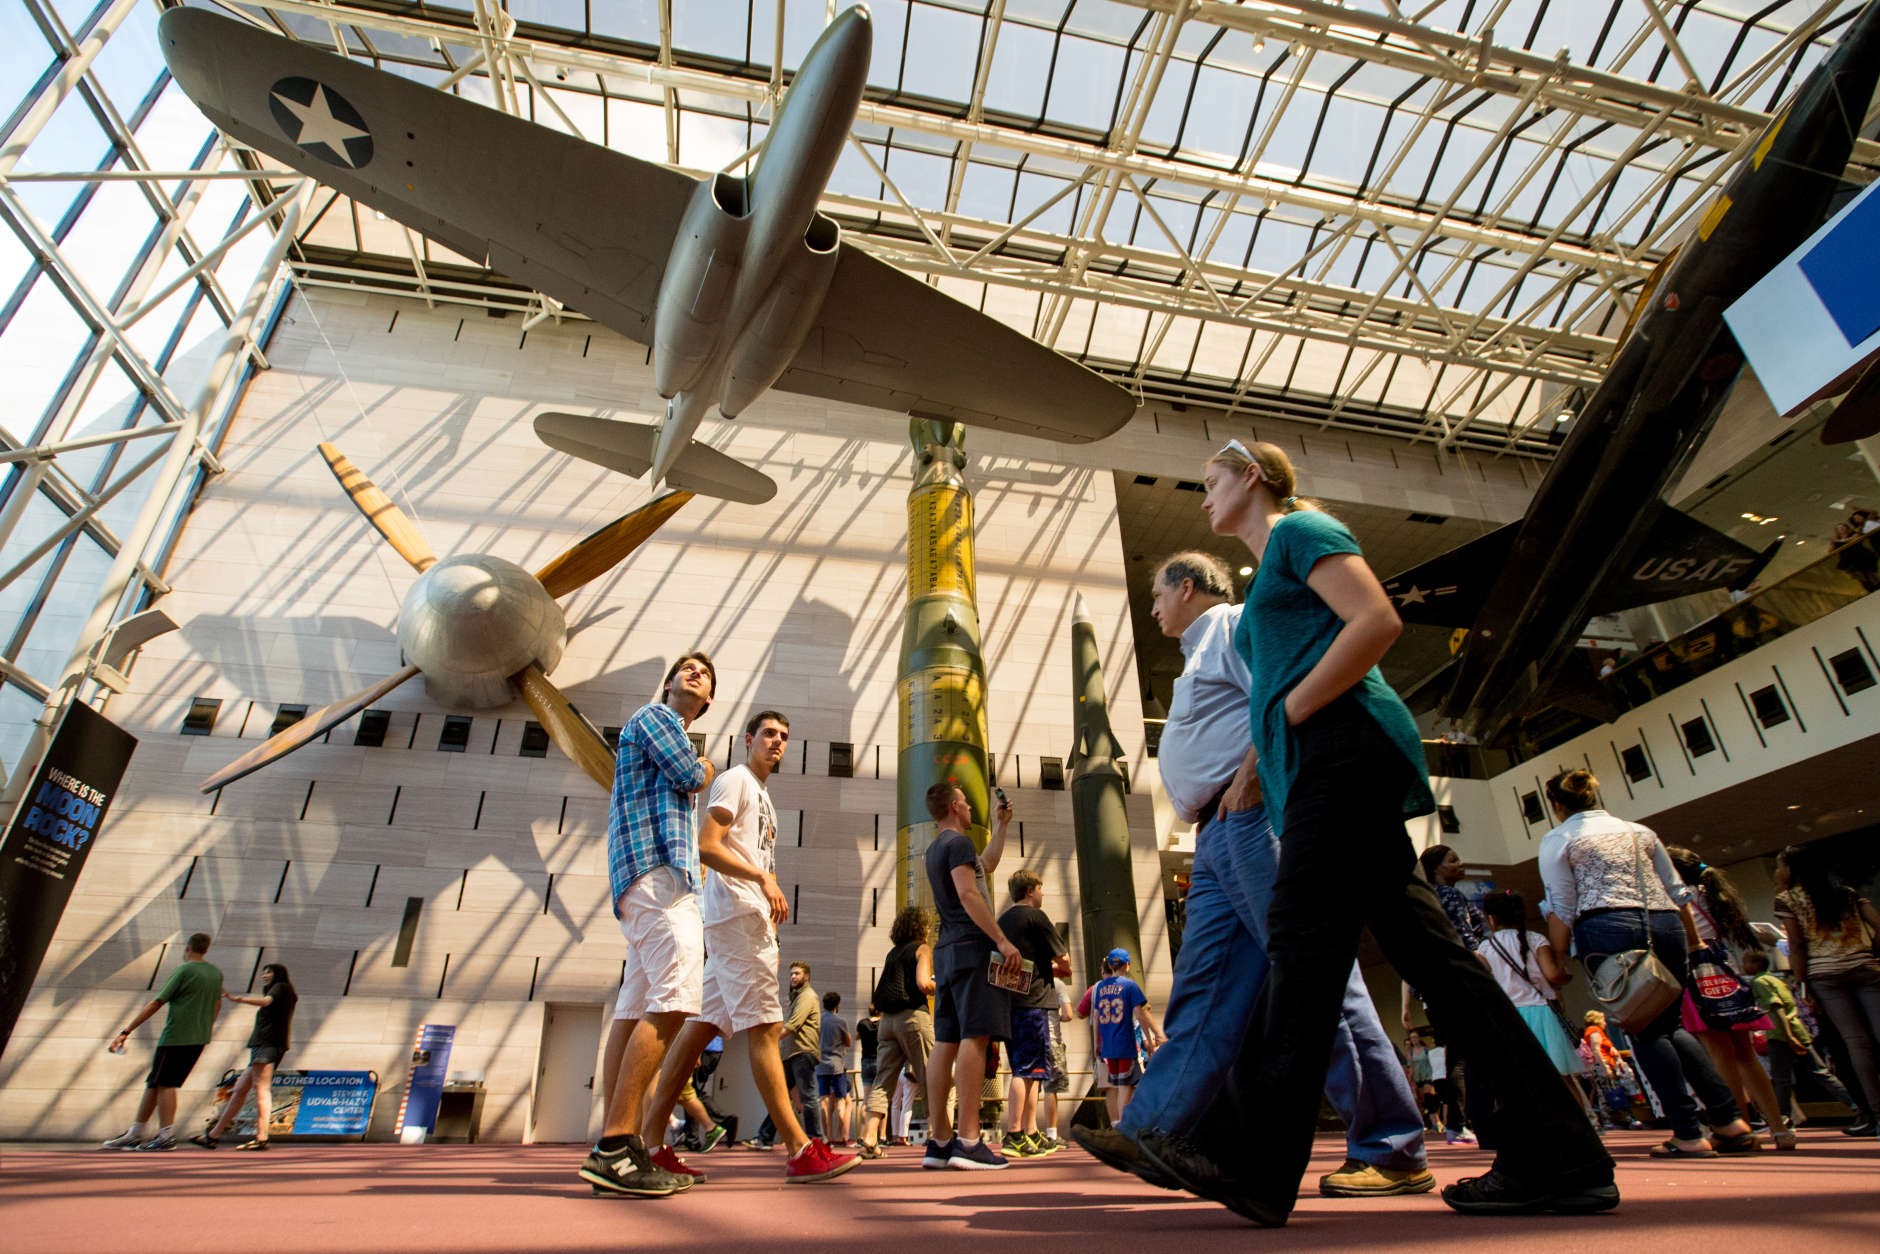 In this photo taken April 19, 2015,  people walk in the Smithsonian National Air and Space Museum in Washington. A record number of U.S. tourists visited Washington last year.
The citys tourism bureau, Destination DC, announced Tuesday, May 3, 2016, that the nations capital welcomed 19.3 million domestic visitors in 2015. Thats up one million from the 2014 total, and it shows the continuing strength of Washingtons tourism industry after the Great Recession. (AP Photo/Andrew Harnik)